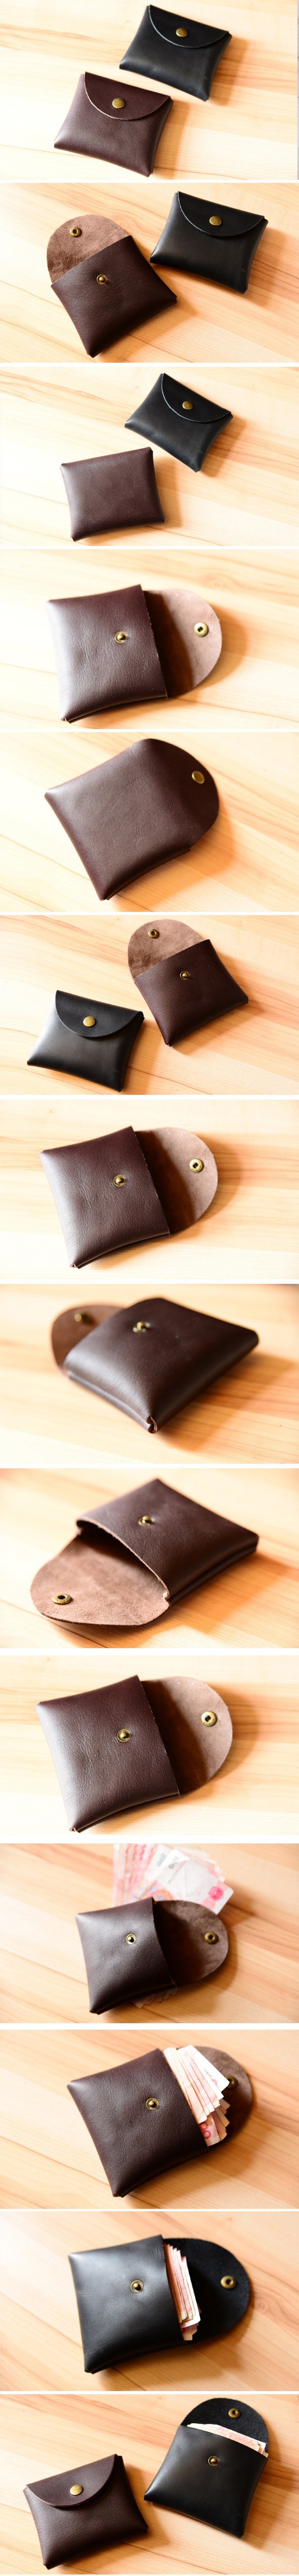 Handmade Fashion Genuine Cowhide Leather Card Holder Wallet Coin Purse For Men Women Free Shipping (1)